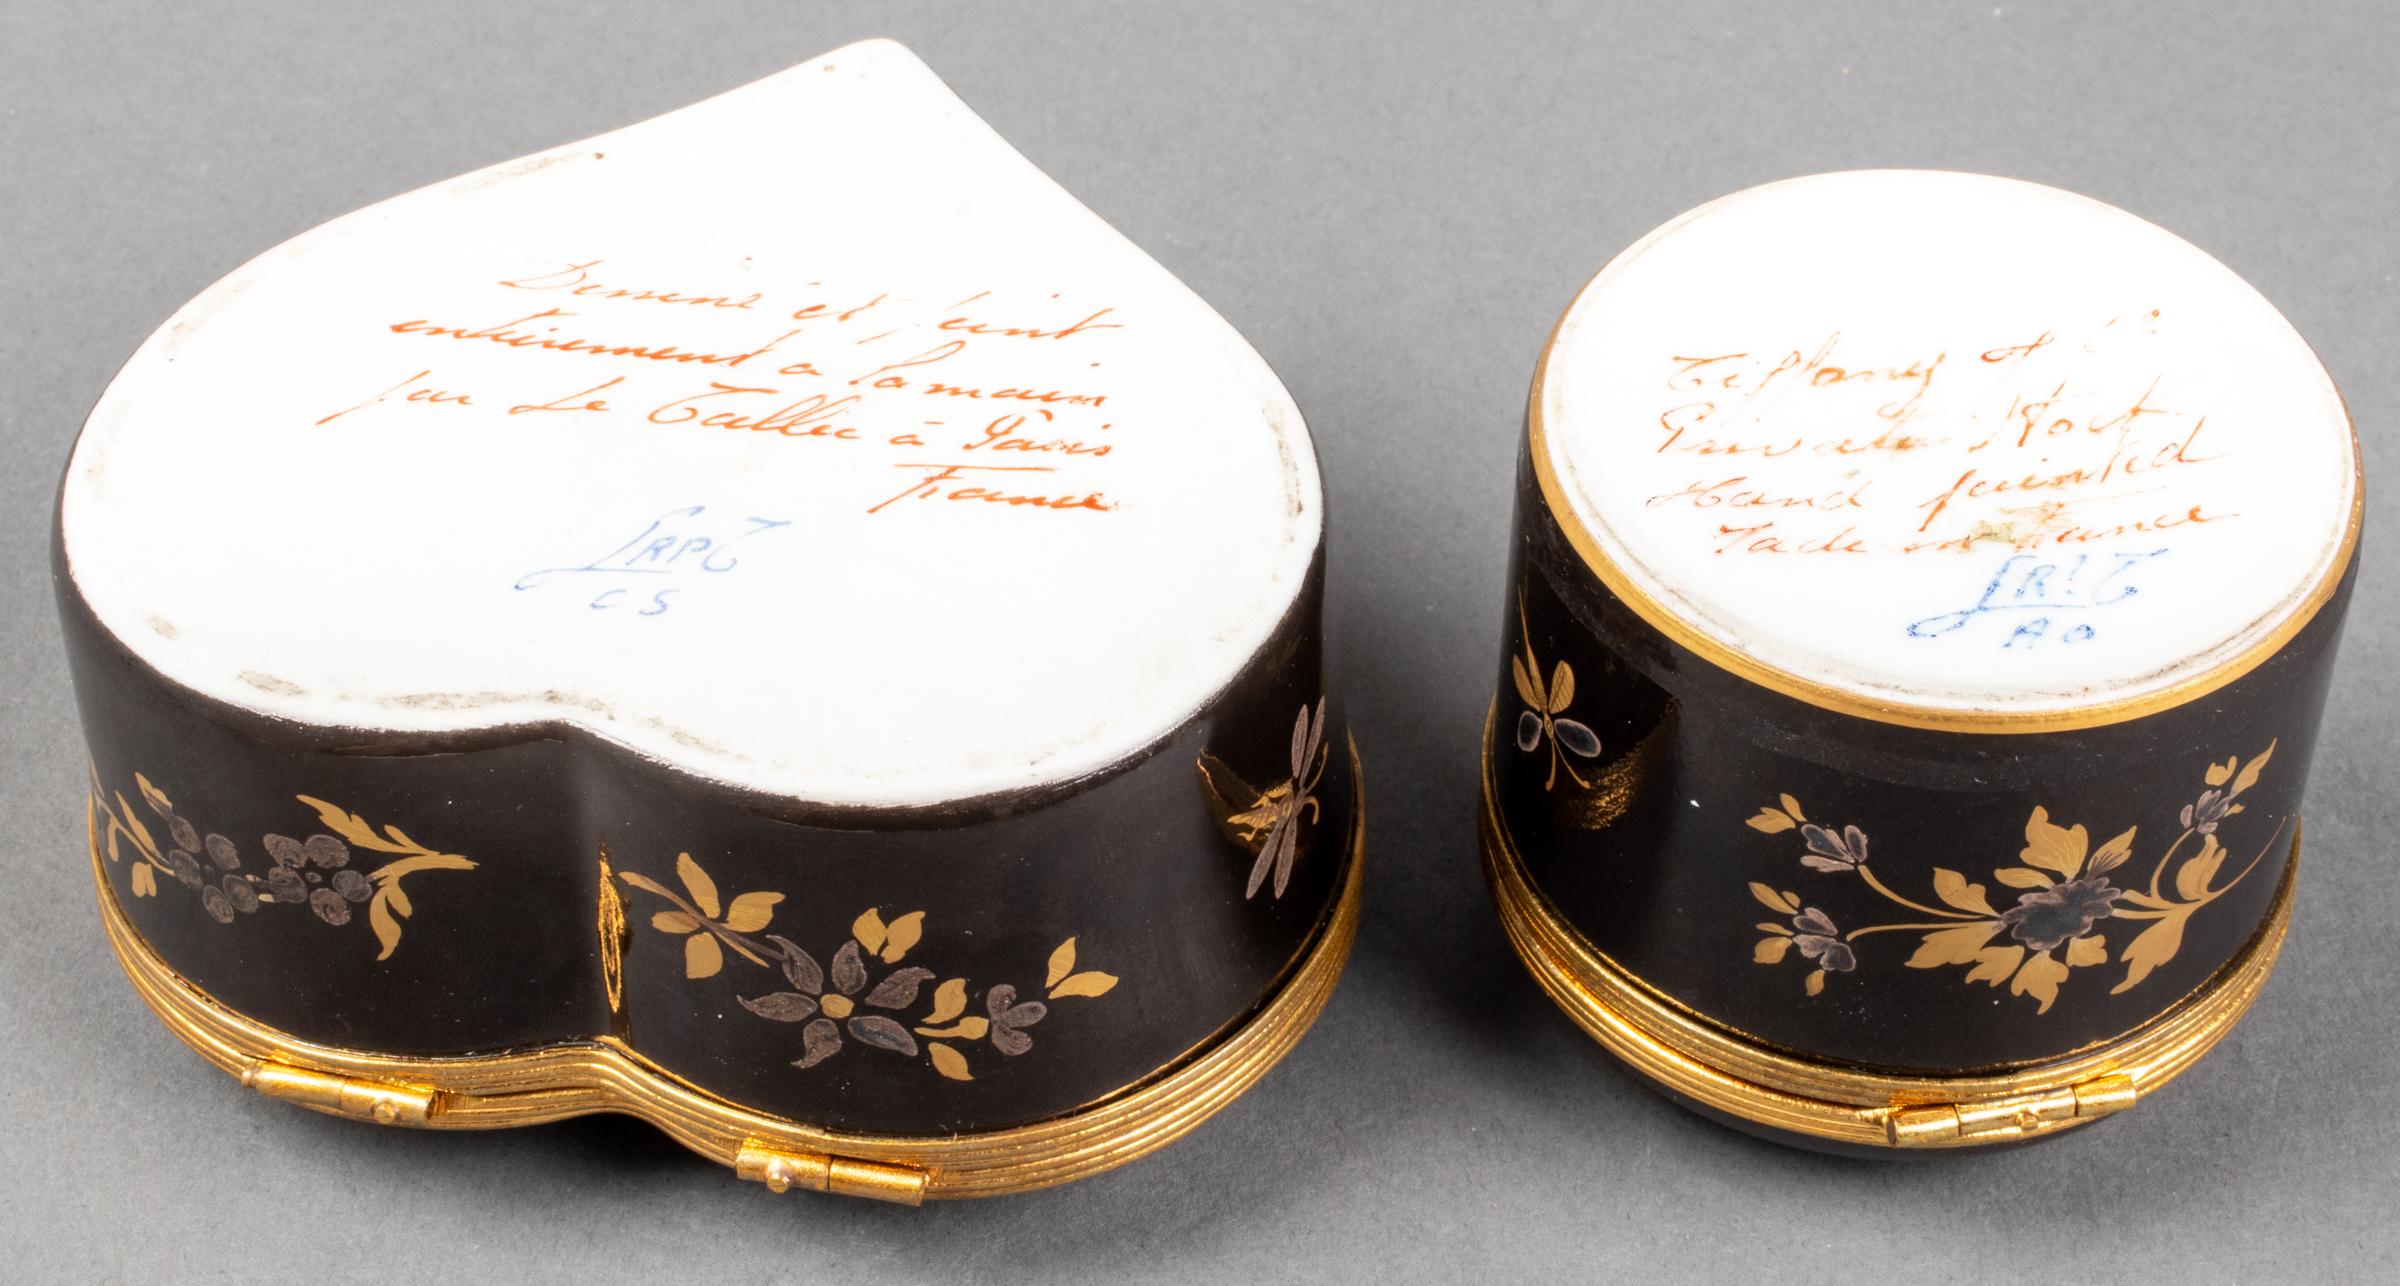 Two Le Tallec hand painted and gilt decorated black porcelain boxes, 1980s, probably from the Cirque Chinois pattern, one round and one of heart-form, both overall with Chinoiserie scenes and decorations, round box signed to base 